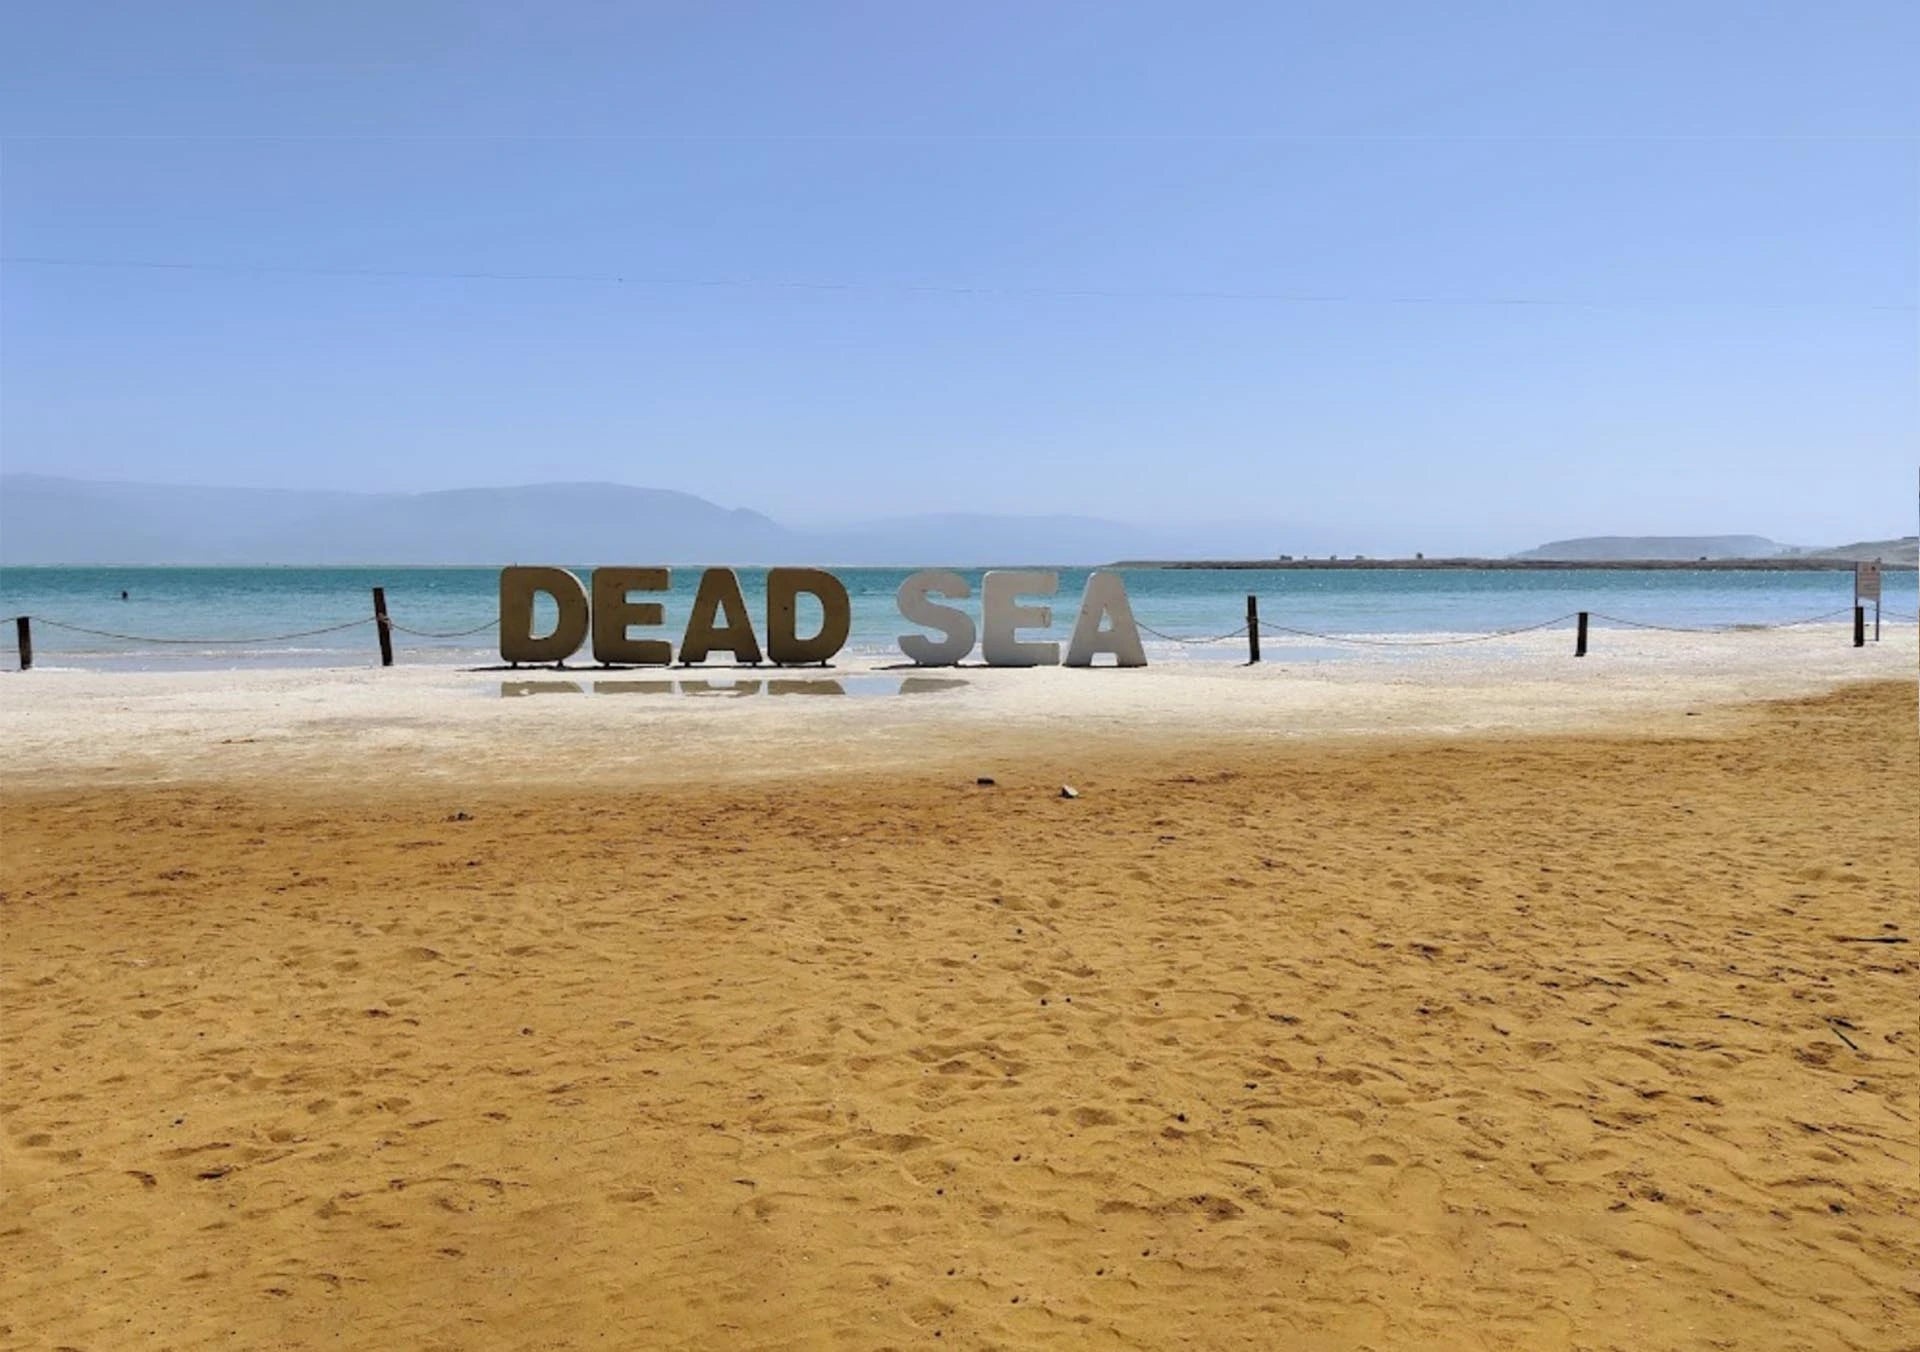 Top 10 Fabulous Things To Do in the Dead Sea